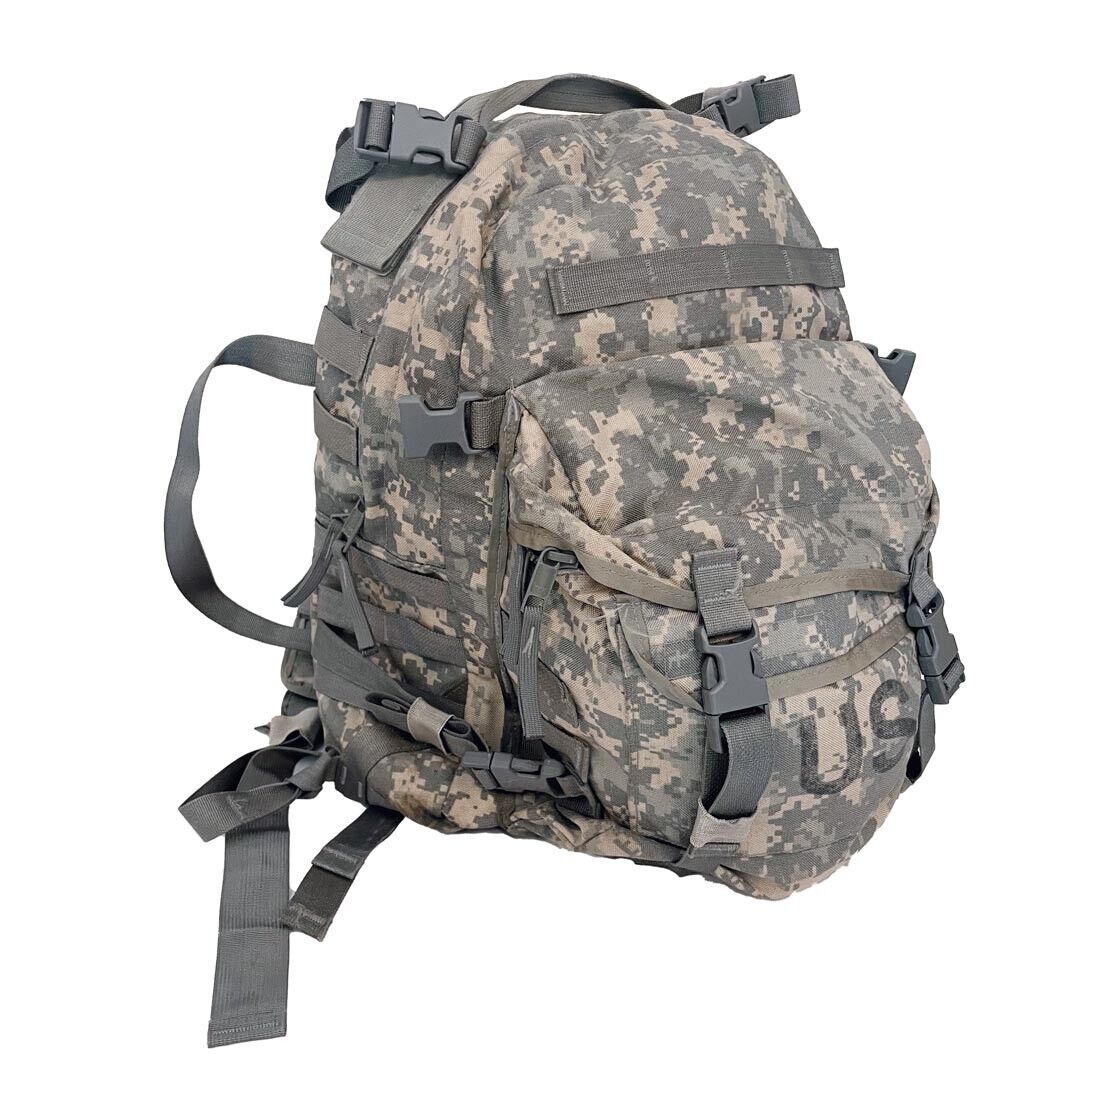 US ARMY USGI ACU Molle II 3 Day Assault Pack Backpack w/ Stiffener EXC